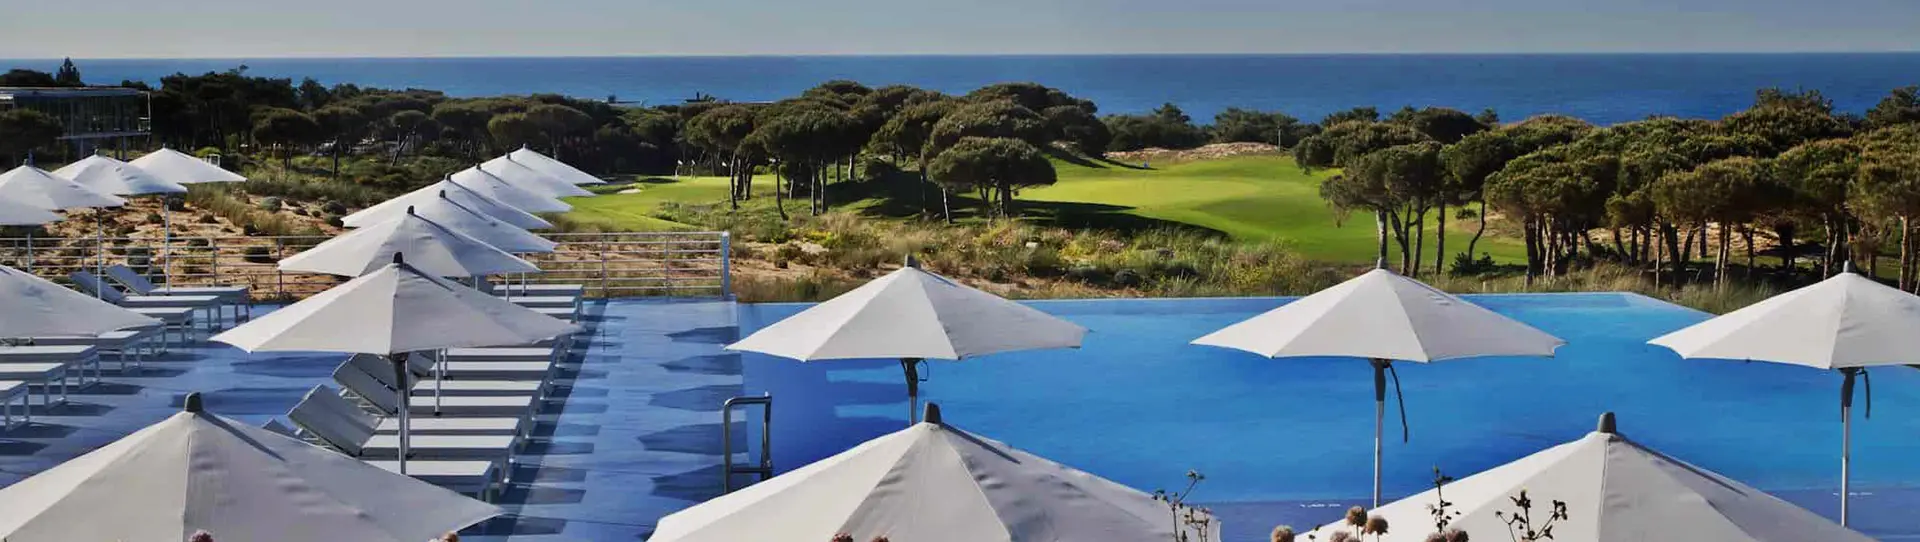 Portugal golf holidays - <b>Dunes Experience</b>3 Nights BB & 2 Golf Rounds<br> - Photo 2